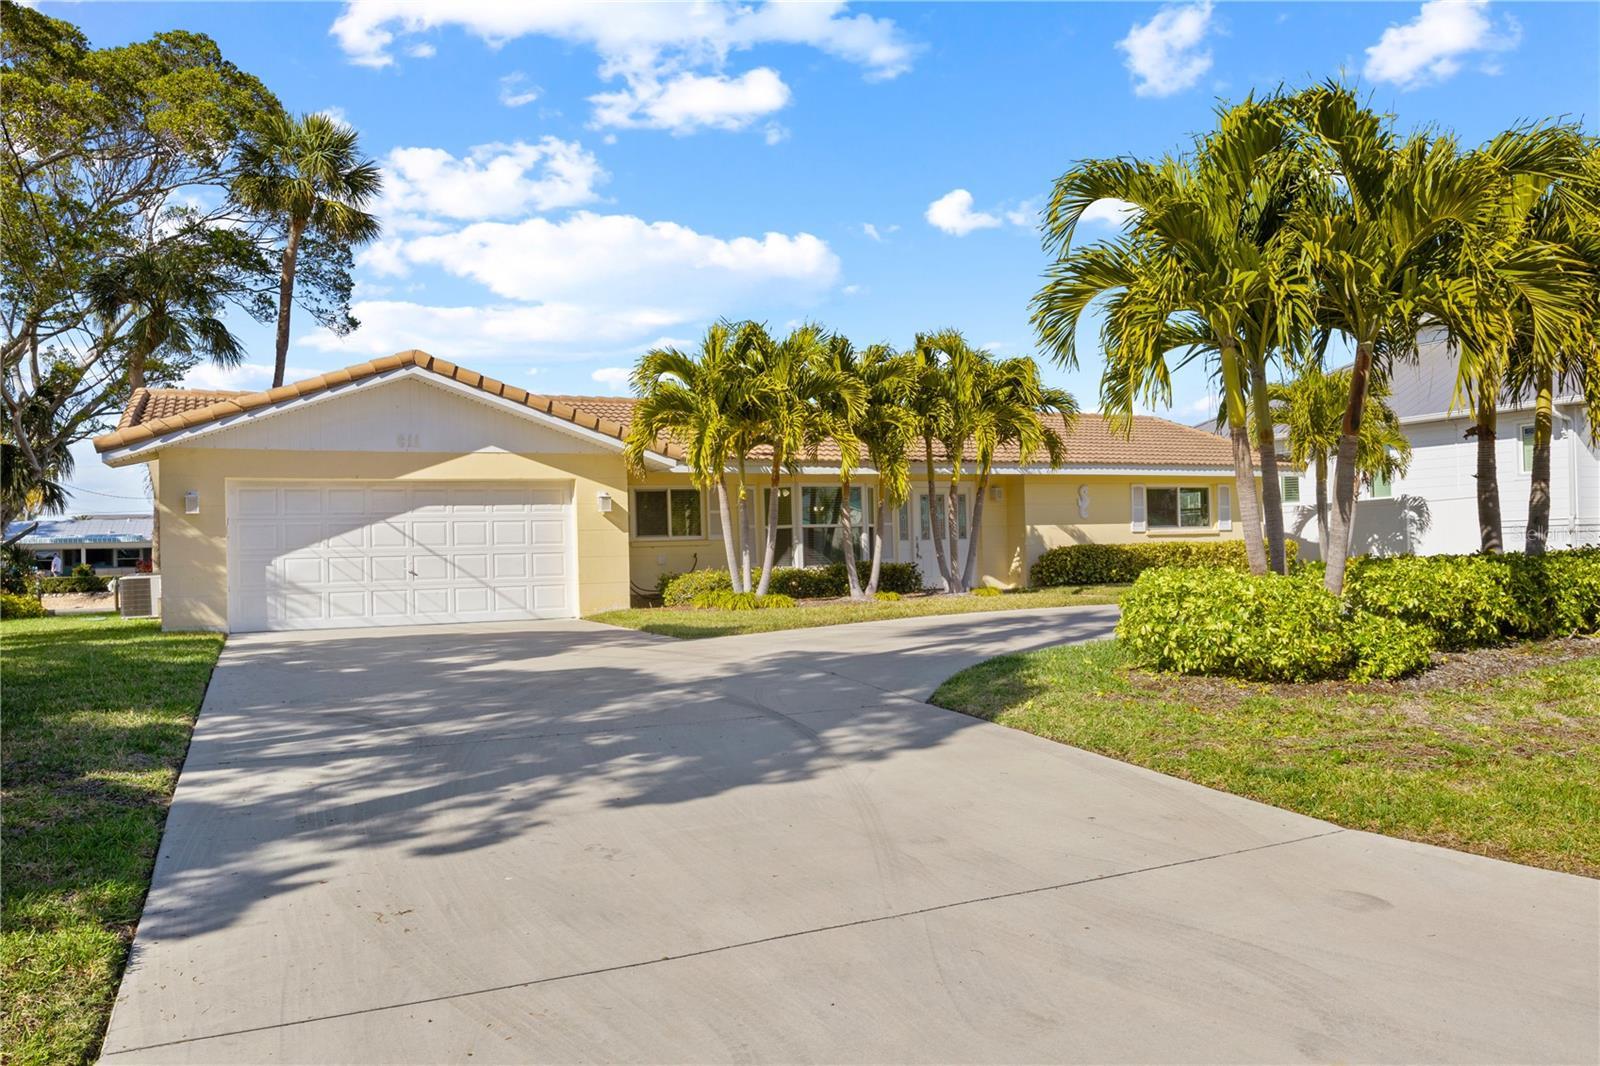 Photo one of 611 Dundee Ln Holmes Beach FL 34217 | MLS A4602685